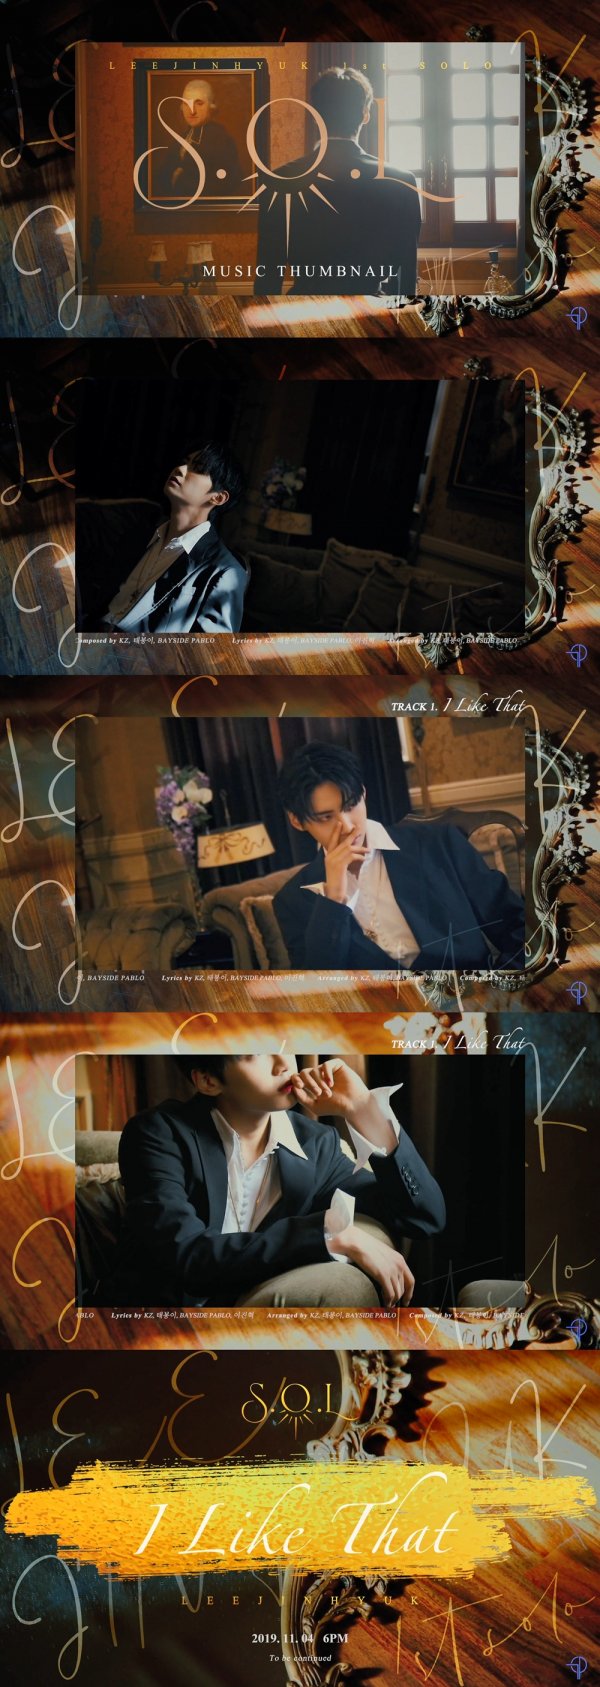 Singer Lee Jin-hyuk released the title song I Like That music thumbnail.On October 31, the TOP Media official YouTube account revealed LEE JIN HYUK (Lee Jin-hyuk) I Like That MUSIC THUMBNAIL.In the video, Lee Jin-hyuk drew attention, spewing a luxurious vibe in a black suit and white shirt.In addition, the phrase To be continued at the end of the music thumbnail boosted fans expectations by foreseeing another music thumbnail release.Lee Jin-hyuks first solo album S.O.L title song I Like That is a song of rap and hip-hop genre. It is a point of development of songs and various compositions that do not know where to go.Lee Jin-hyuk will also participate in the writing and will send a message to fly the future to be unfolded together, not alone.Lee Jin-hyuk, who started the countdown of the first solo album S.O.L. released on the 18th of last month, has raised expectations for the new album by radiating the opposite charm with pure PURE version and luxurious GOLD version.Lee Jin-hyuks first solo album I Like That will be released on and off on November 4th and will start full-scale activities starting with the showcase on the same day, as expectations for Lee Jin-hyuks solo album are rising through the released music thumbnail.Photo Offering = TOP Media